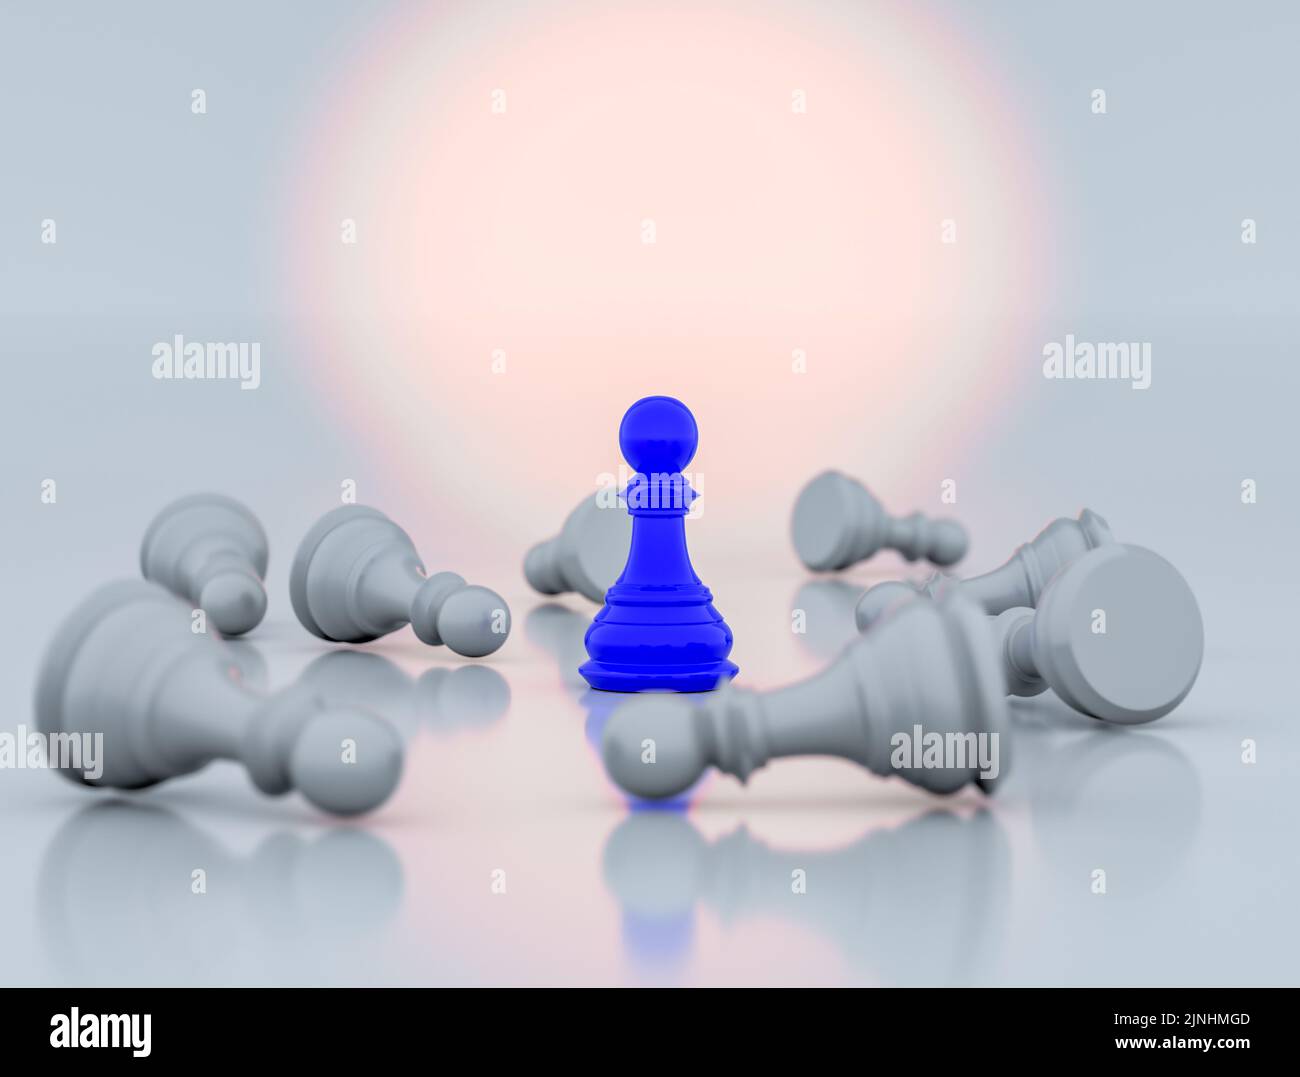 Blue chess pawn standing in the middle of scattered white chess pieces, concept of victory, competition and business. 3d illustrations Stock Photo